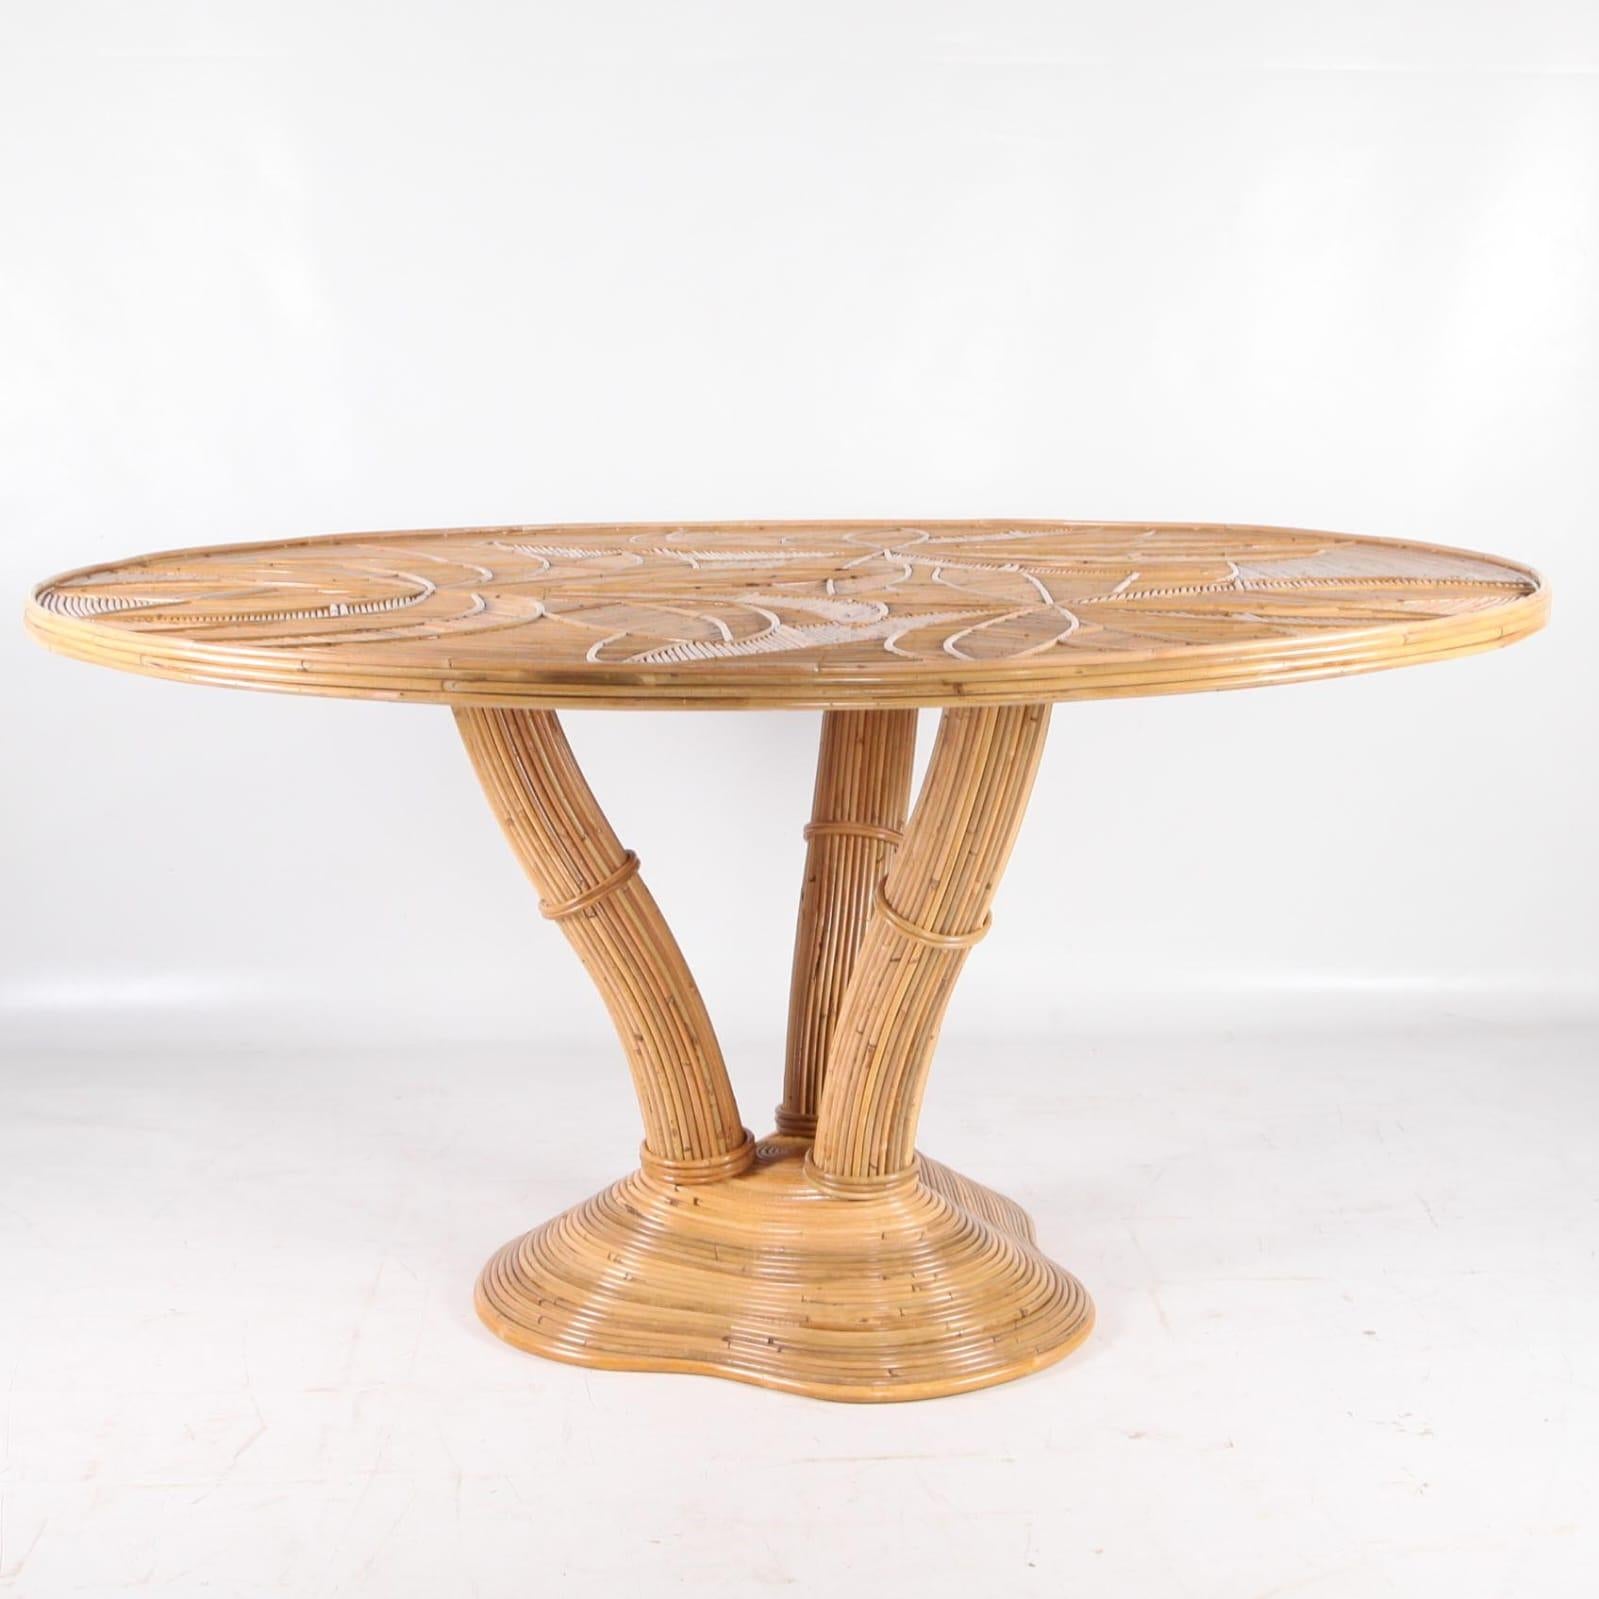 Exceptional round rattan dining table.
Legs representing a palmtree, top with palms patterns covered by a glass top. 
High quality work entirely hand made, rare!